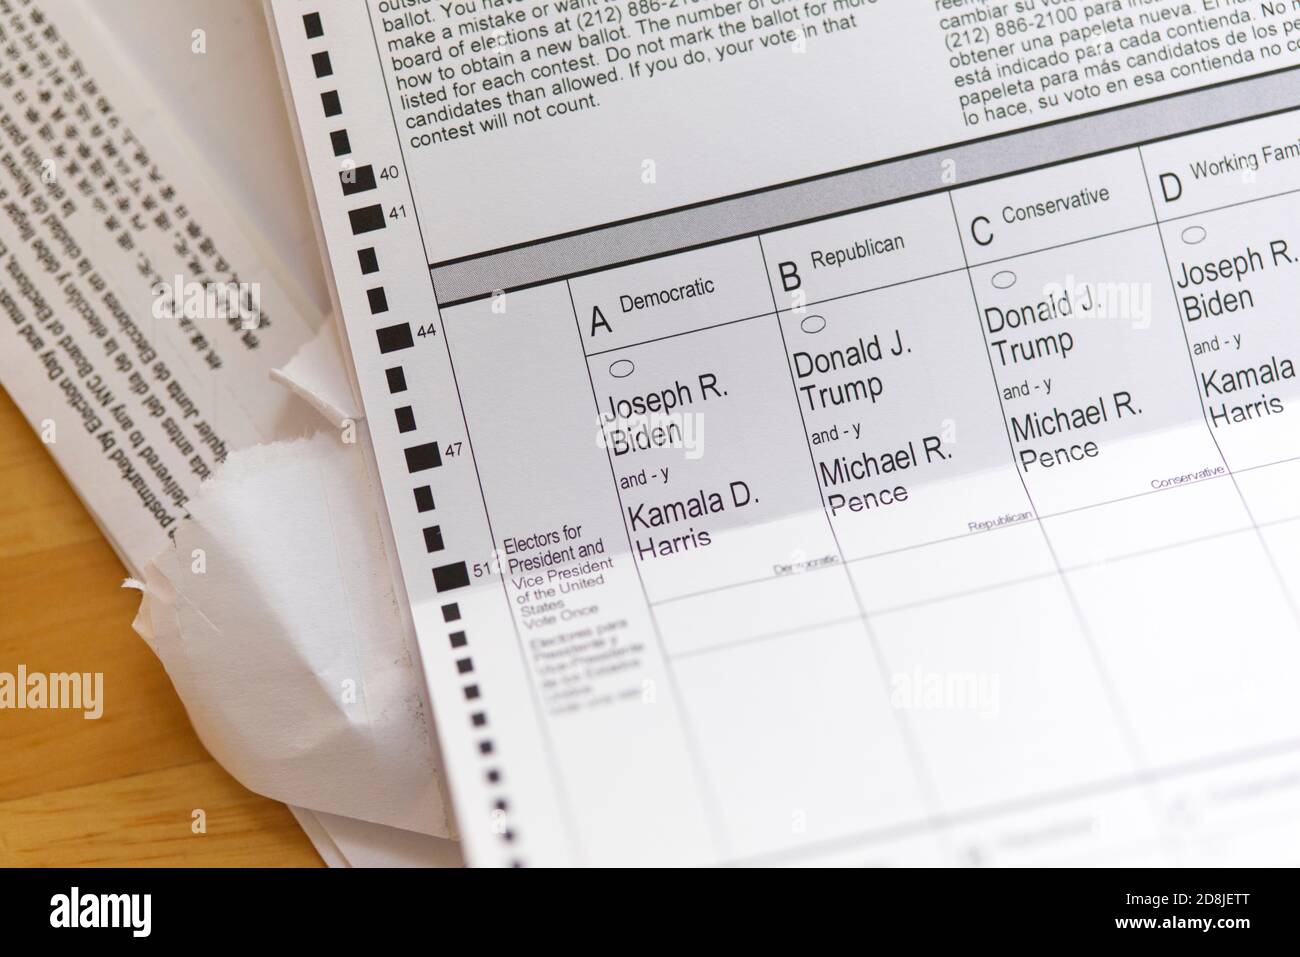 Close-up view of a New-York State absentee ballot for the 2020 Presidential elections, Friday October 30th, 2020, New York City, NY USA. Stock Photo